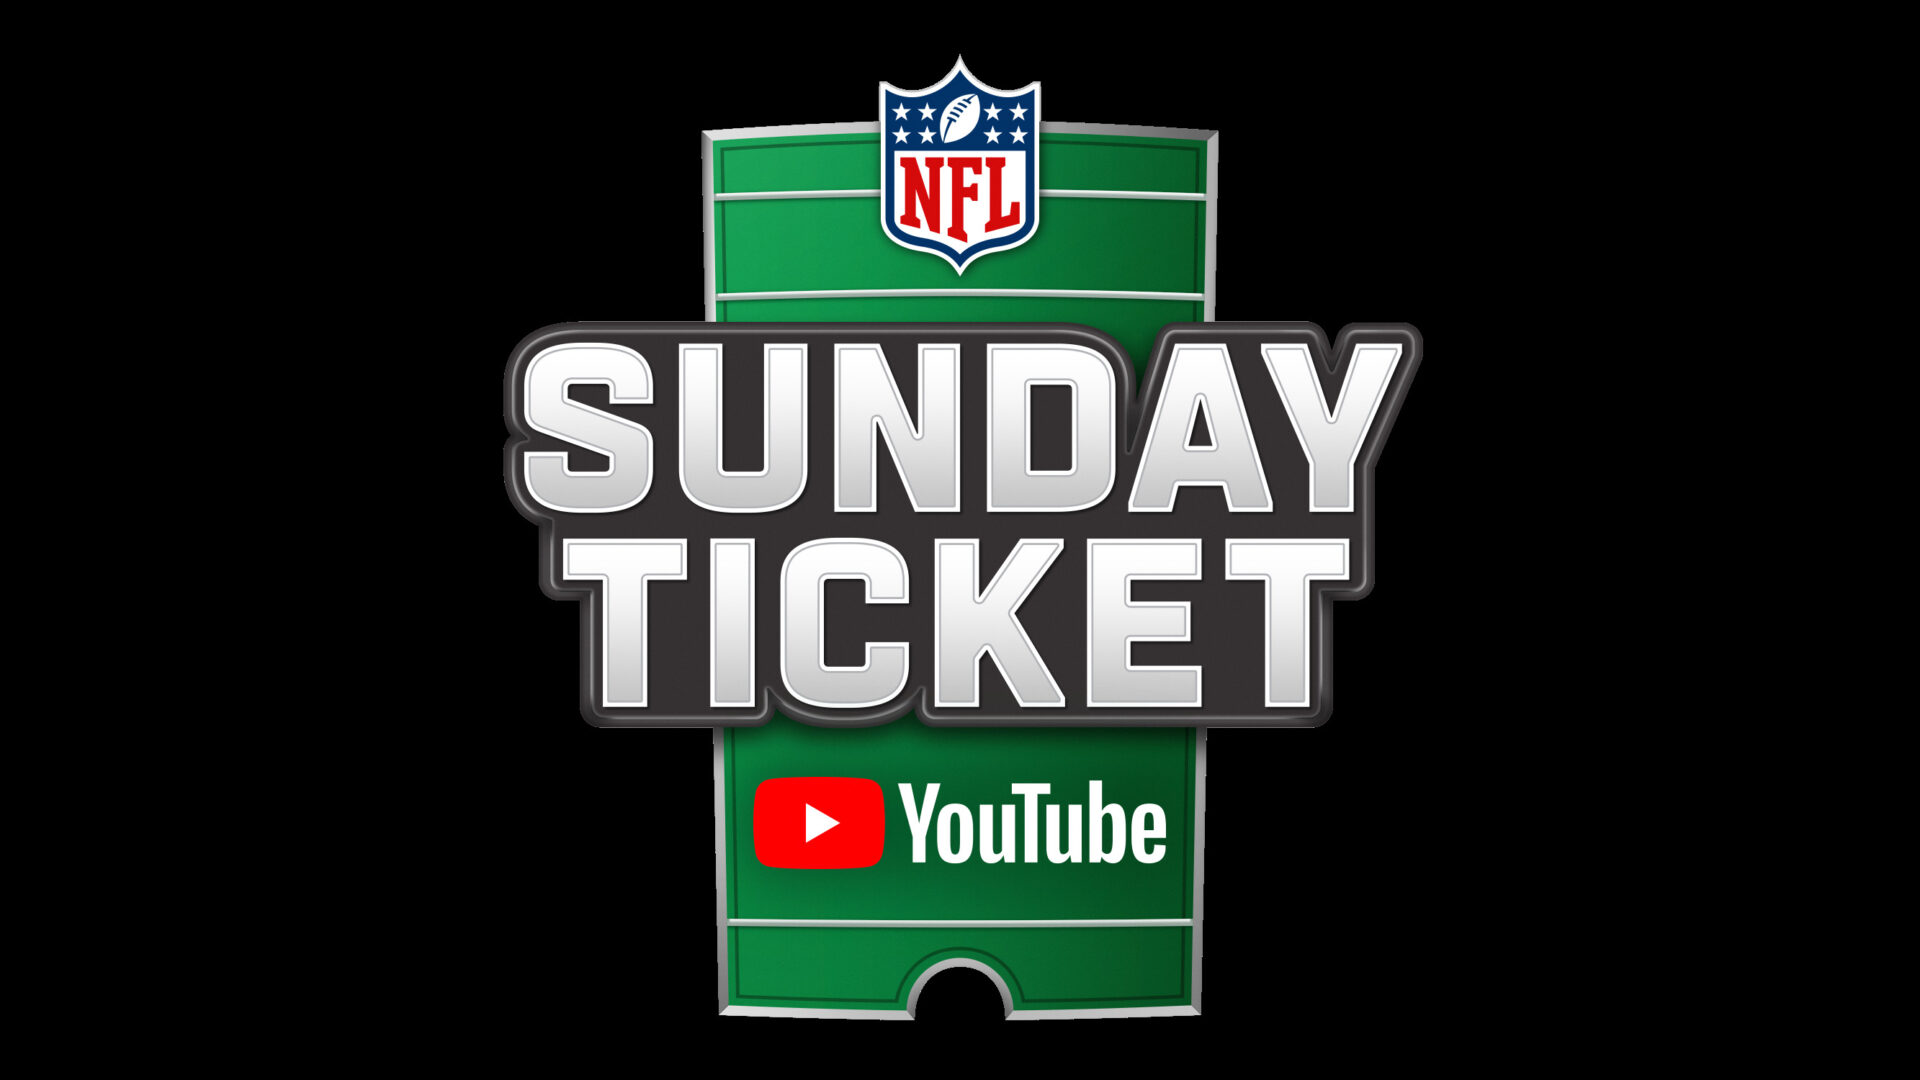 How much is NFL Prime Ticket? — The Daily VPN